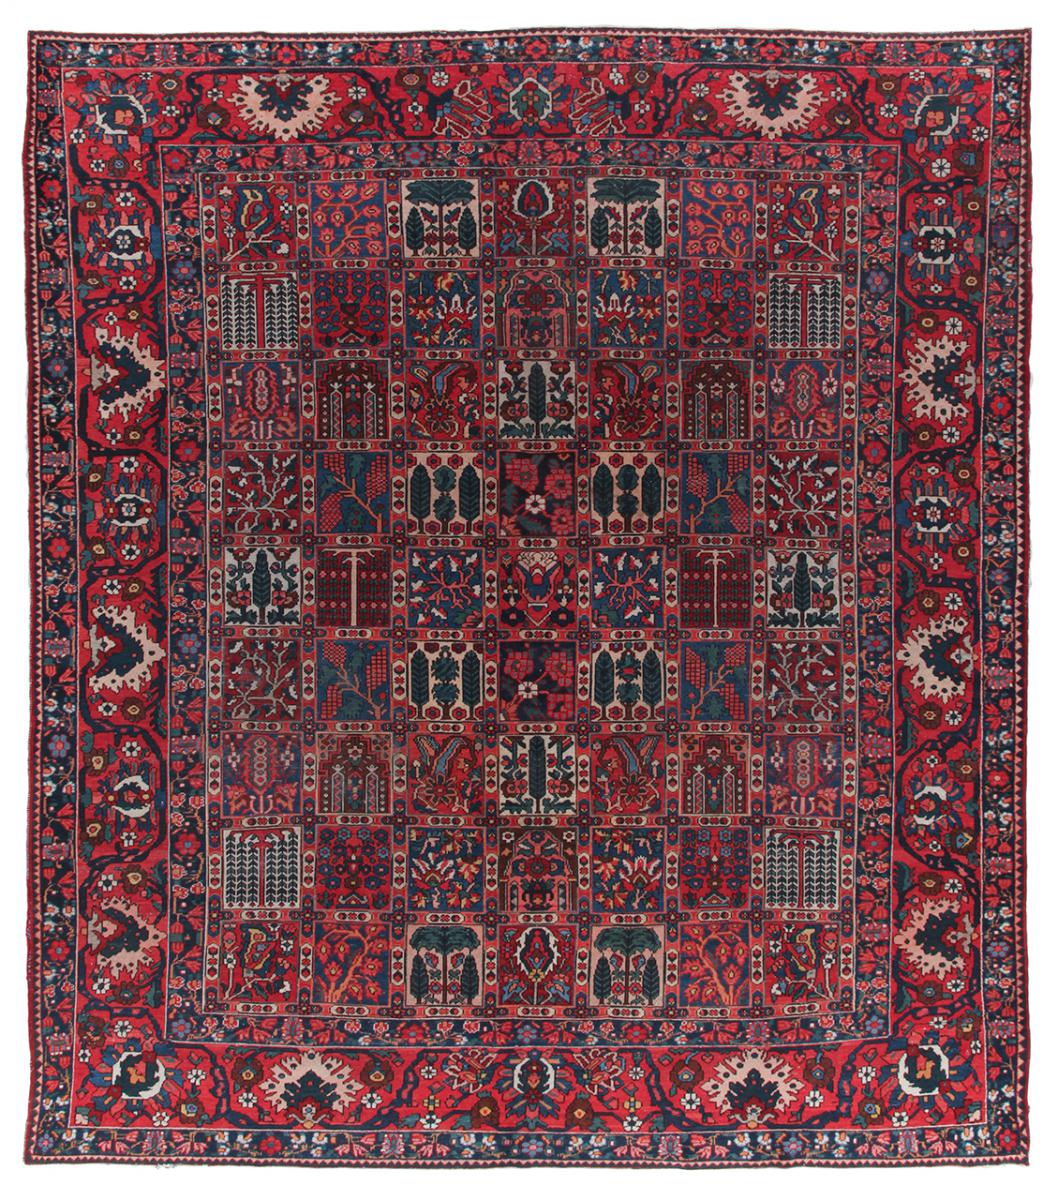 Persian Rug Bakhtiari Antique 430x277 430x277, Persian Rug Knotted by hand